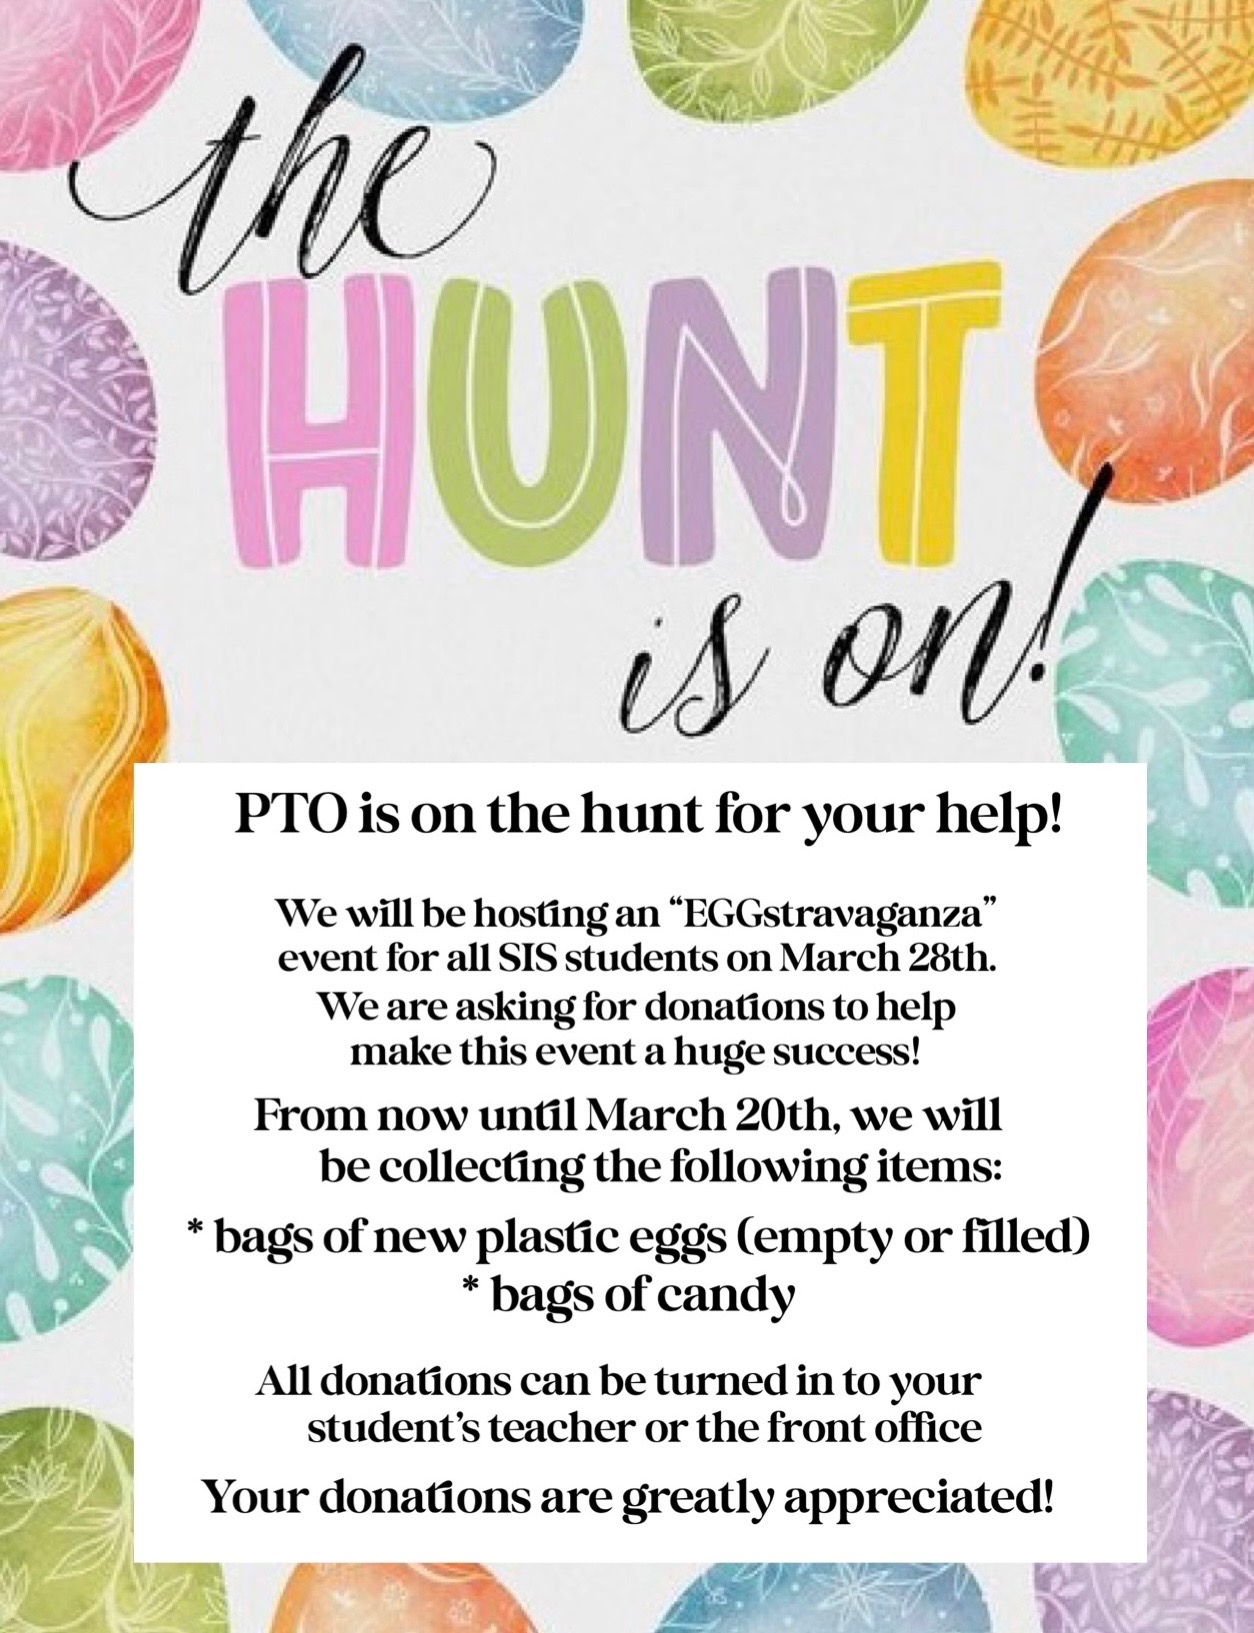 PTO needs your help: EGGstravaganza even for all students on March 28th needs donations to make this event a HUGE success! From now until March 20th, we are collecting bags of new plastic eggs (empty or filled) and bags of candy.  Turn donations into your teacher or the front office!  Your donations are greatly appreciated!!